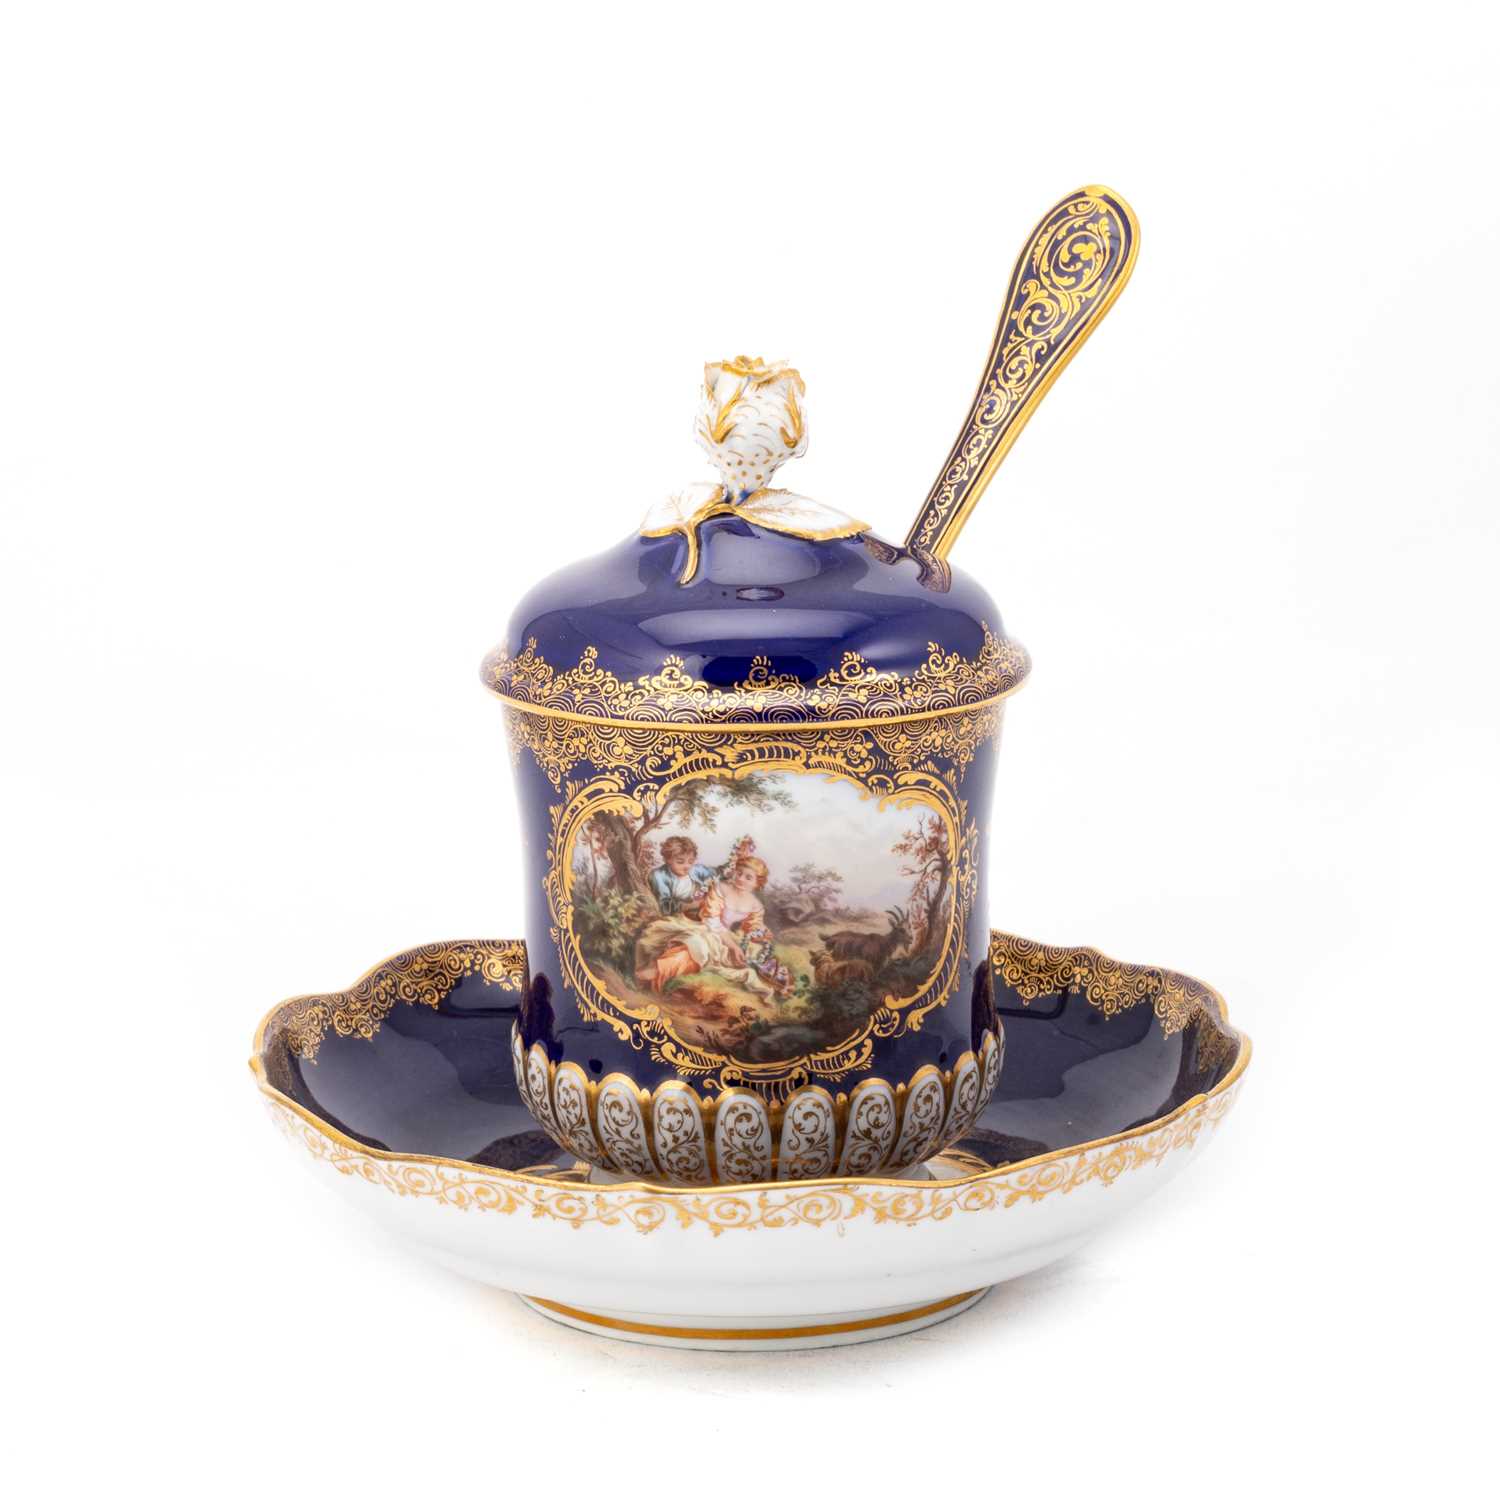 Lot 82 - A MEISSEN BLUE-GROUND CABINET CUP AND COVER WITH MATCHING STAND AND SPOON, CIRCA 1870/ 80